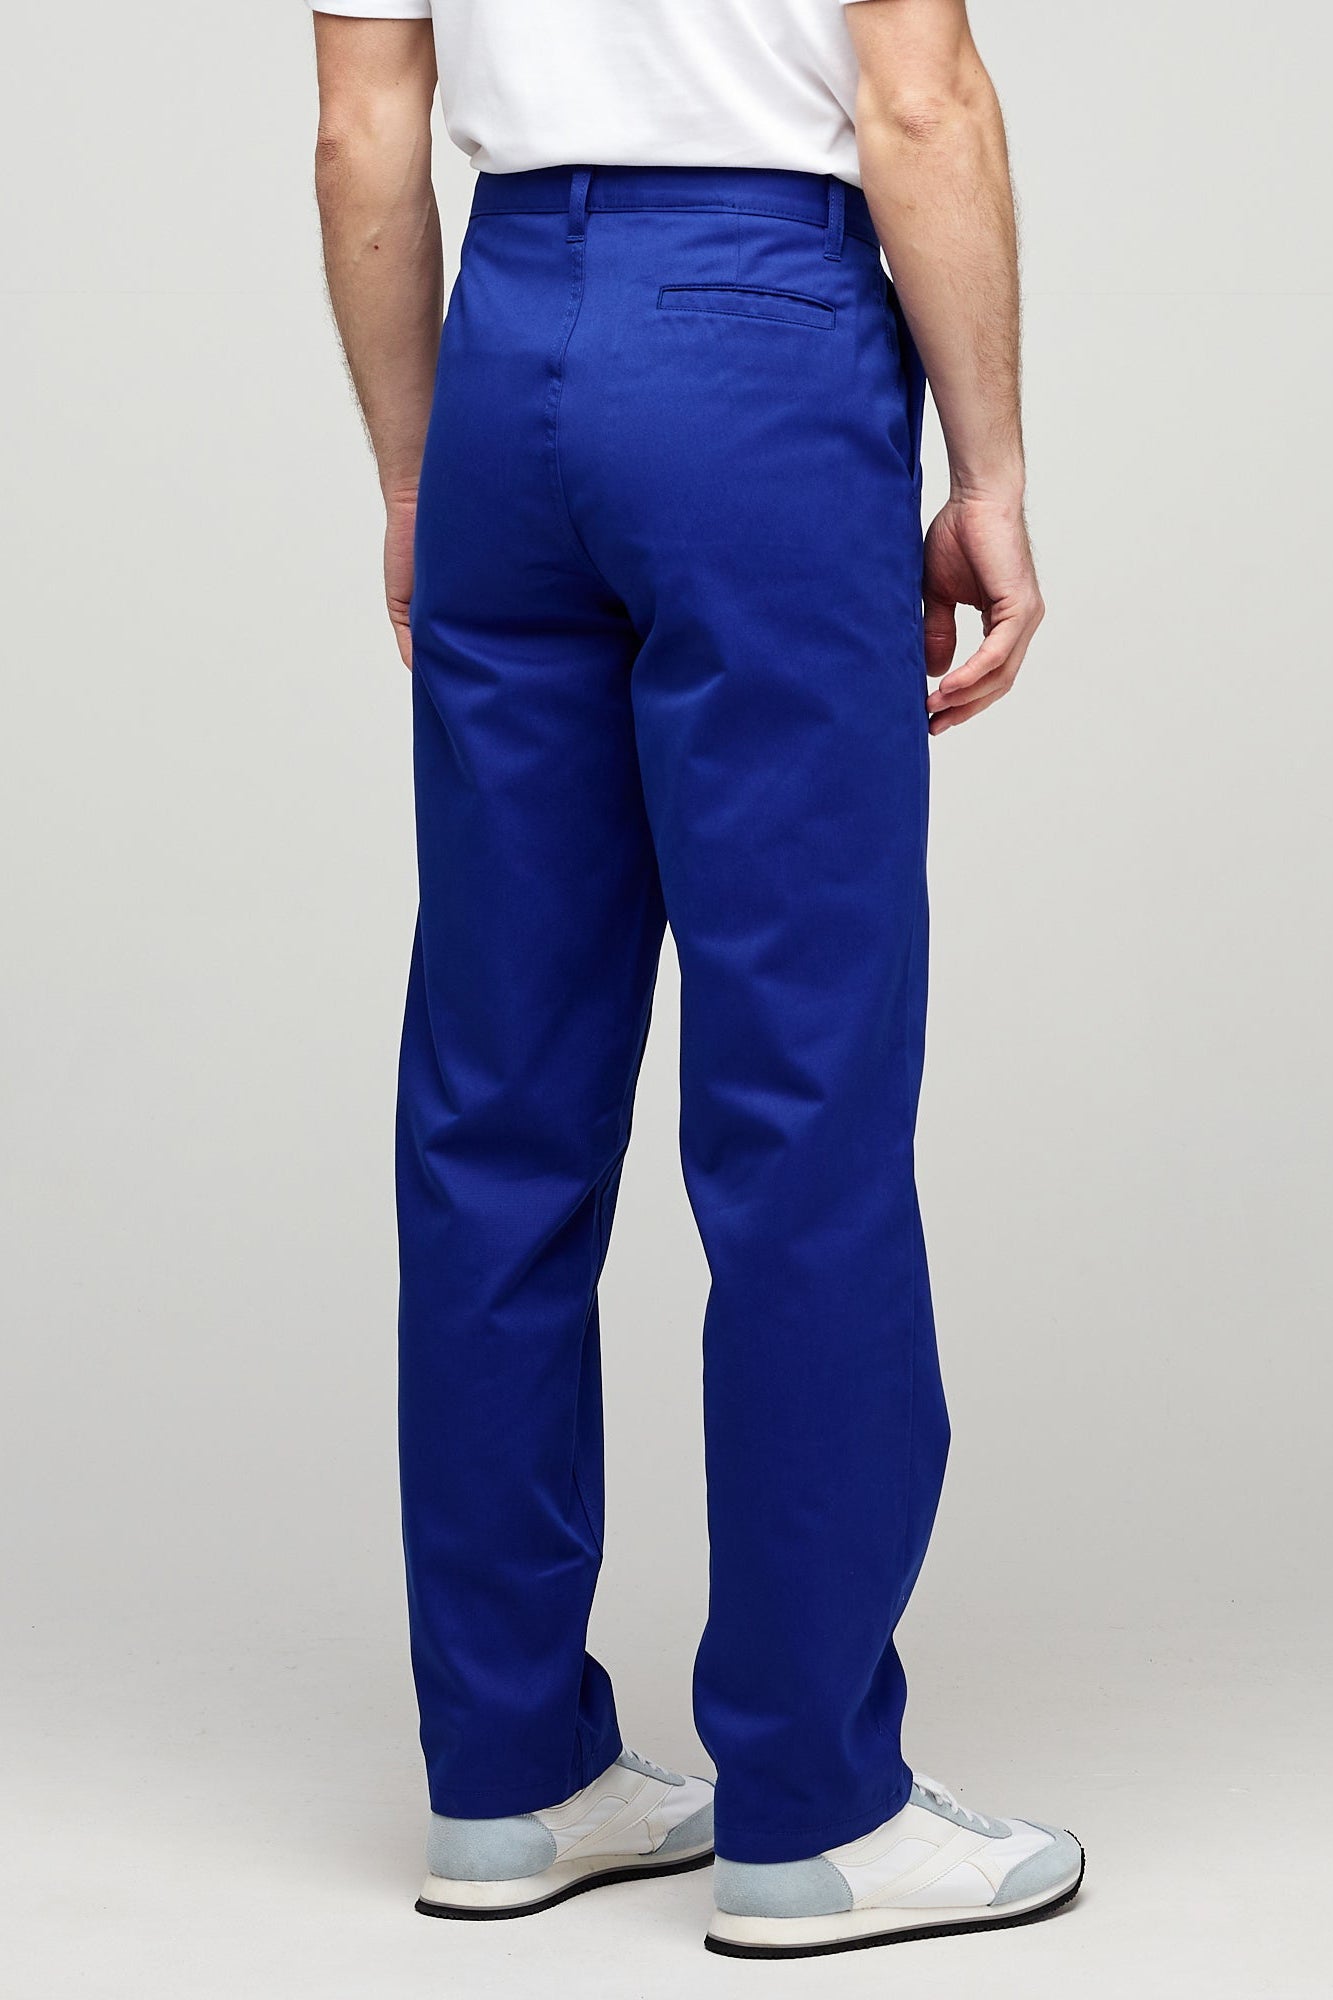 Buy Dark Blue Slim Stretch Chino Trousers from the Next UK online shop